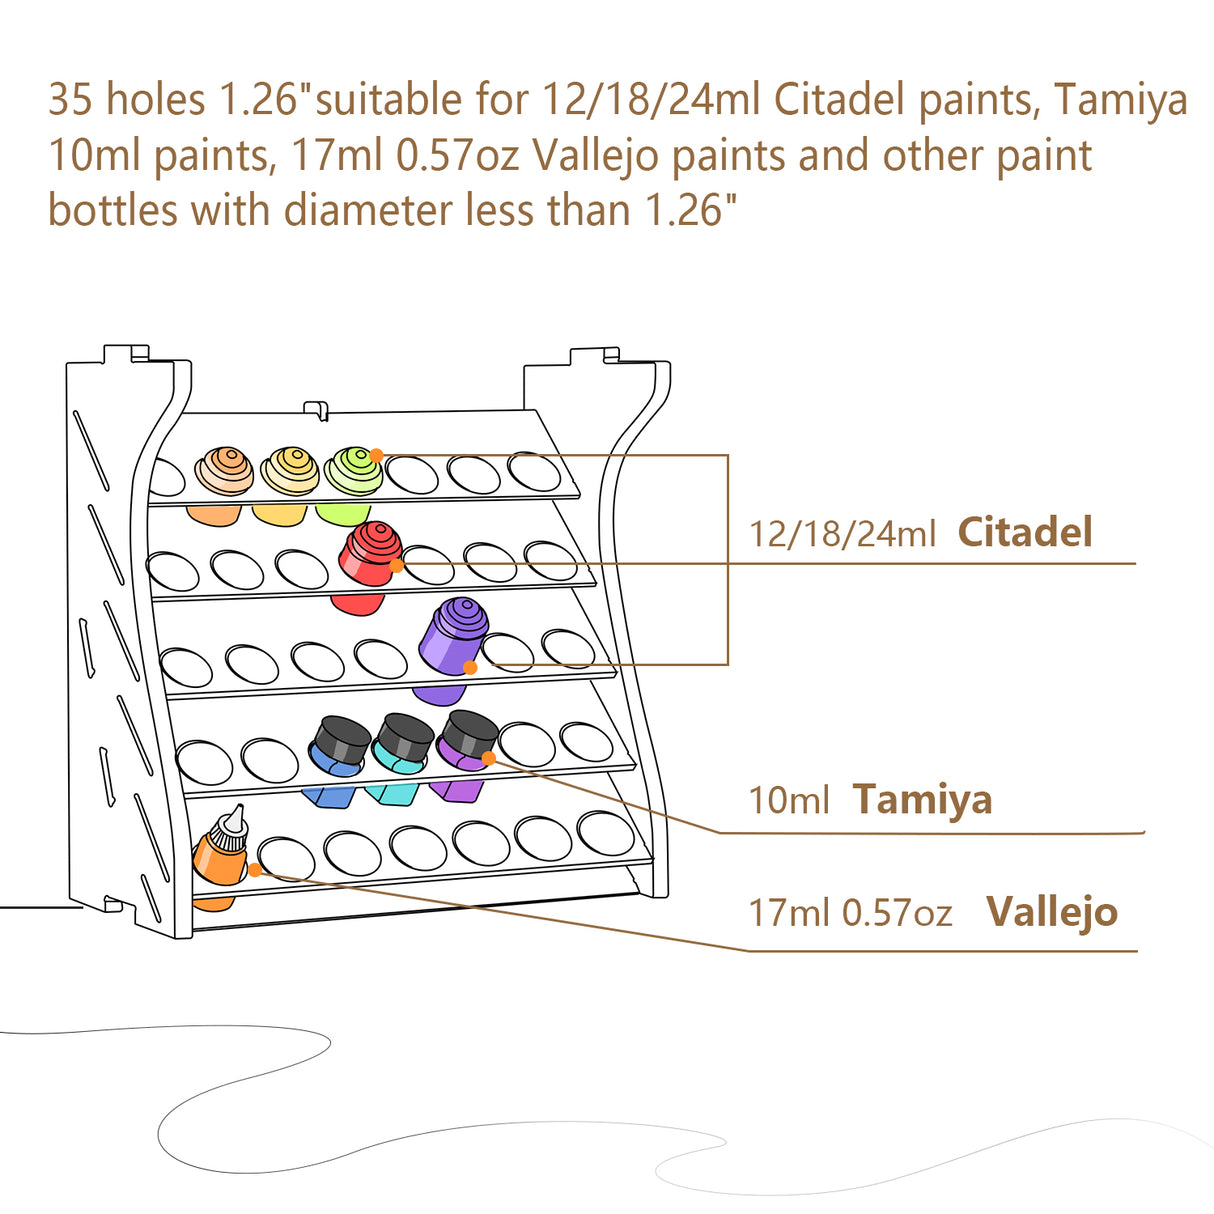 Wooden Model Paint Organizer, Paint Rack with MDF Material for 35 Paint Bottles, Craft Paint Holder Suitable for Tamiya/Vallejo/Citadel, GK11 (Can be combined with other GK style)